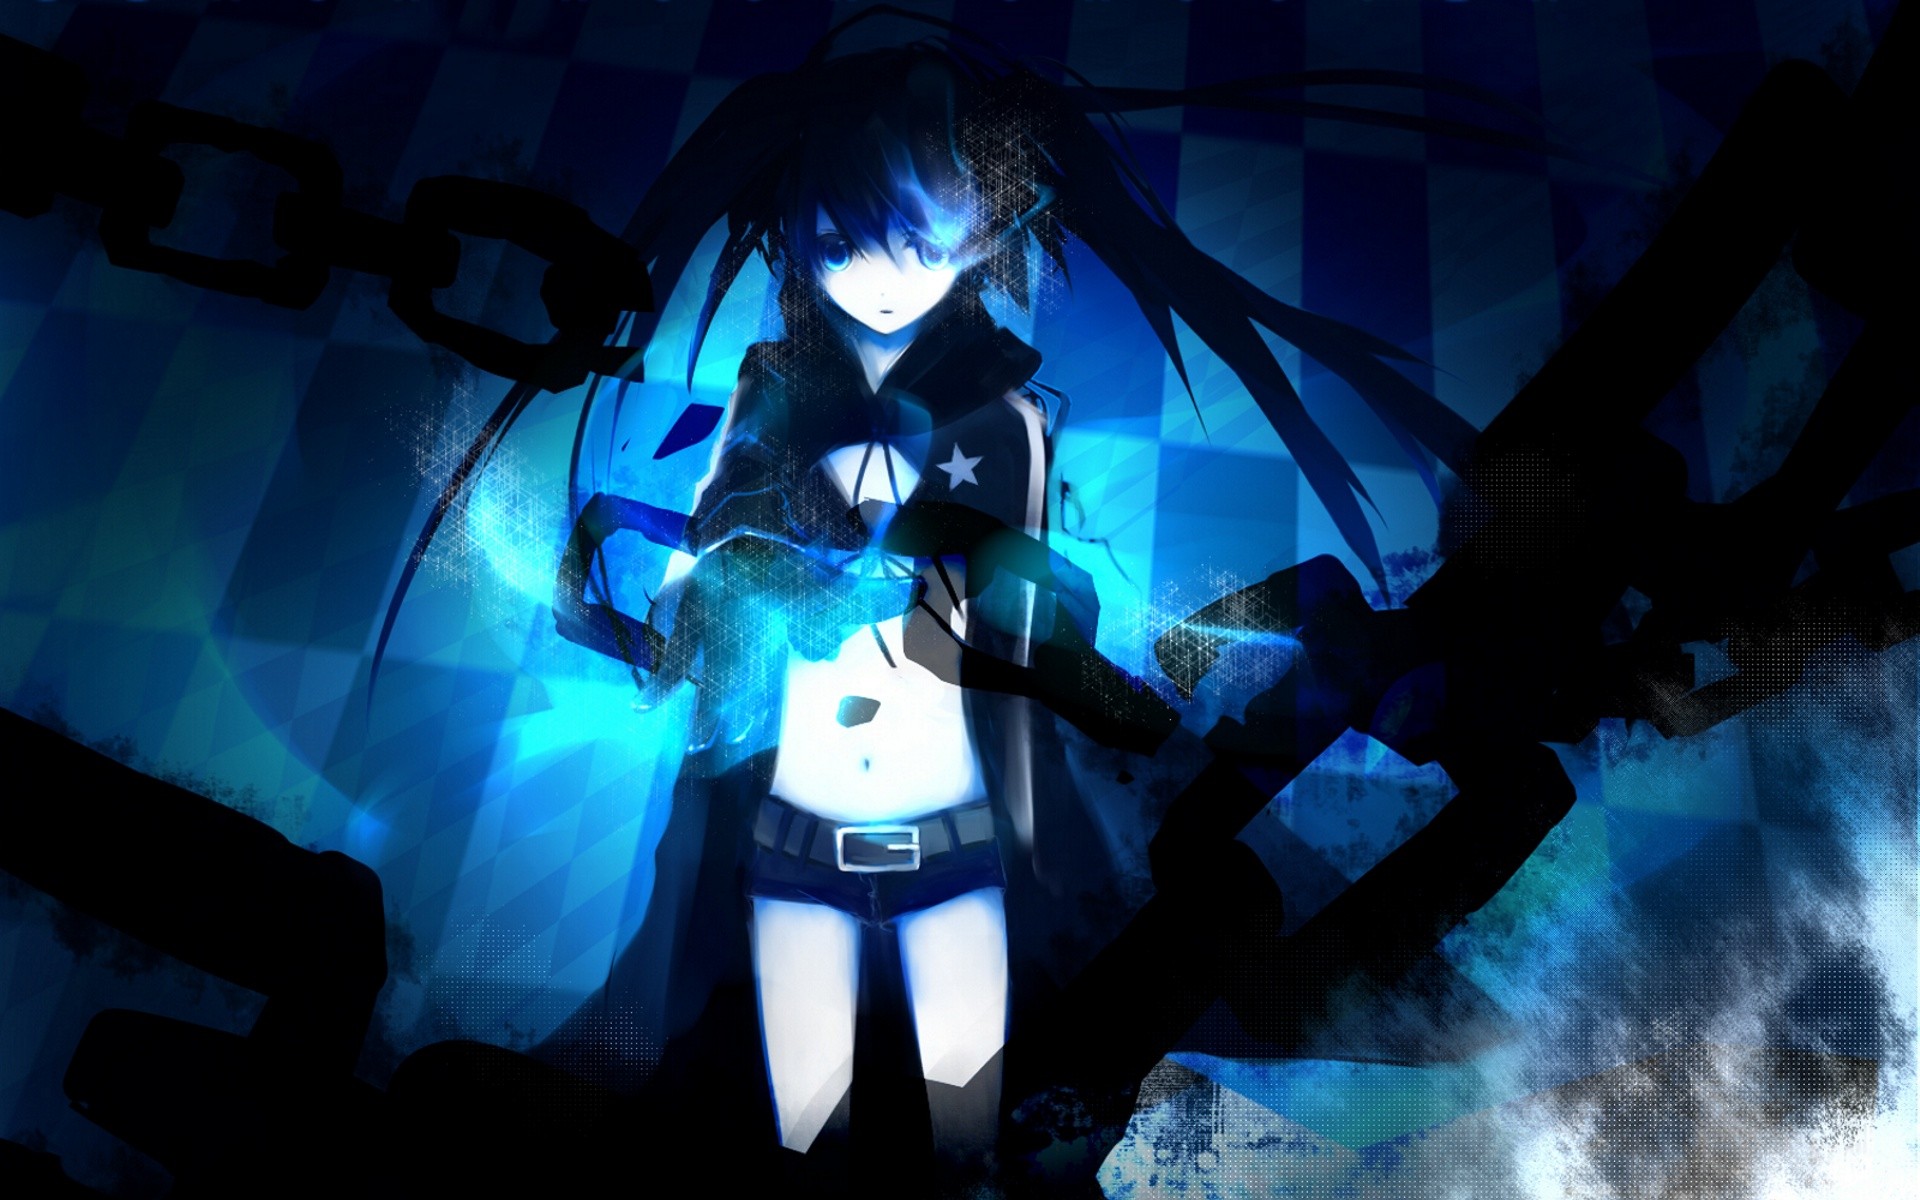 blue, Black, Rock, Shooter, Blue, Eyes, Twintails, Anime, Chains, Anime, Girls, Glowing, Eyes, Black, Hair Wallpaper